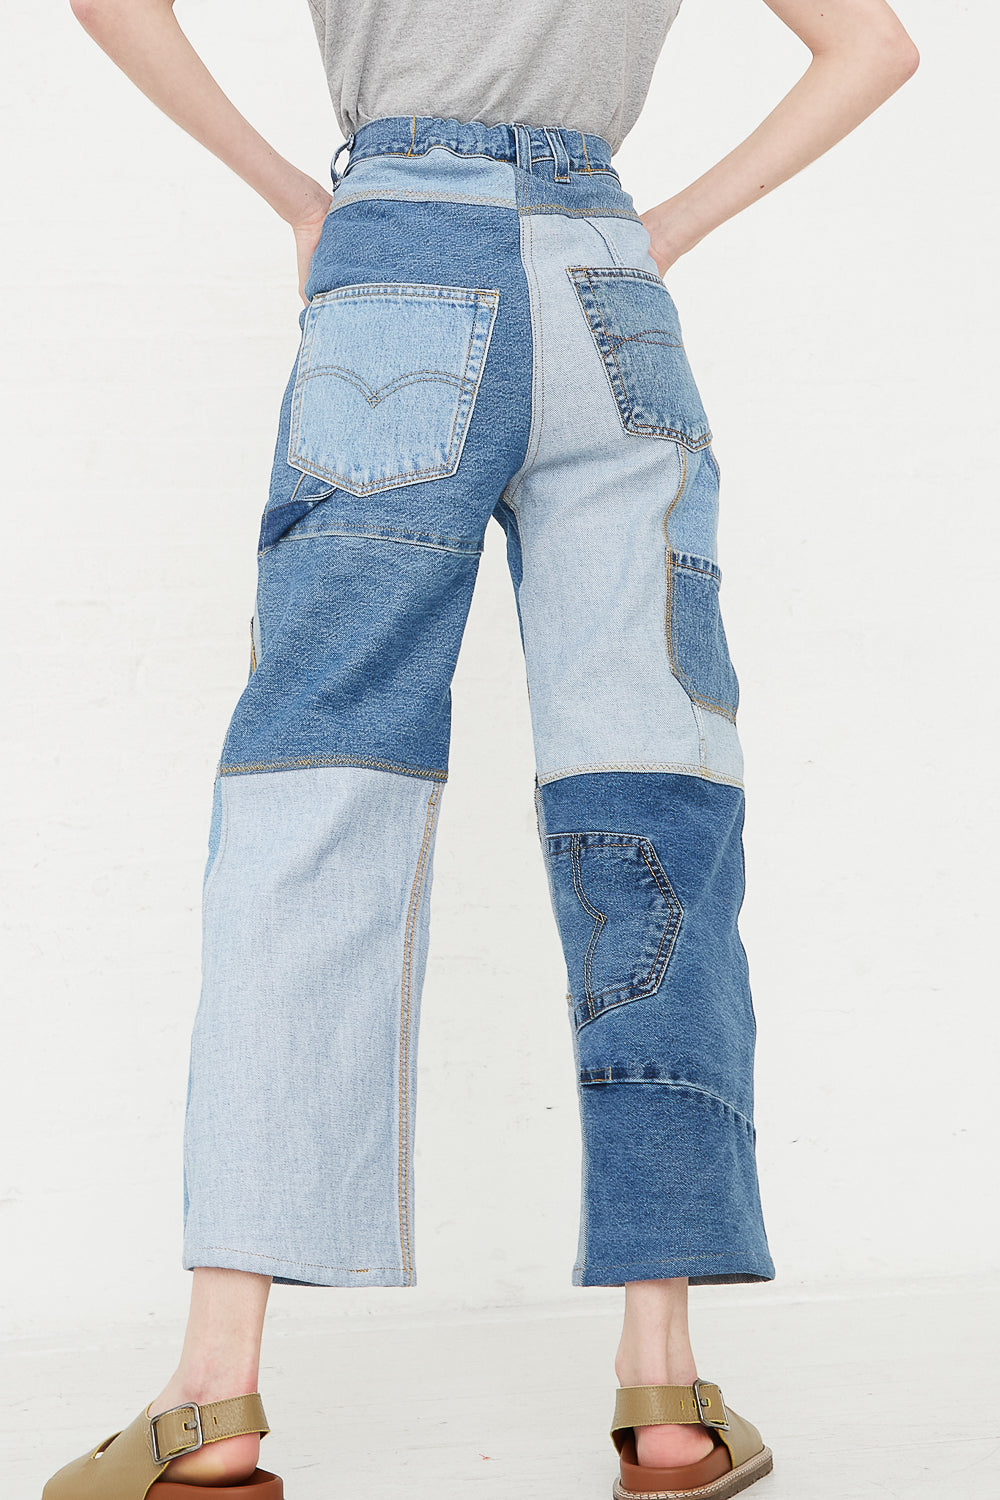 WildRootz - Reworked Jeans in Blue Variation A - S back view